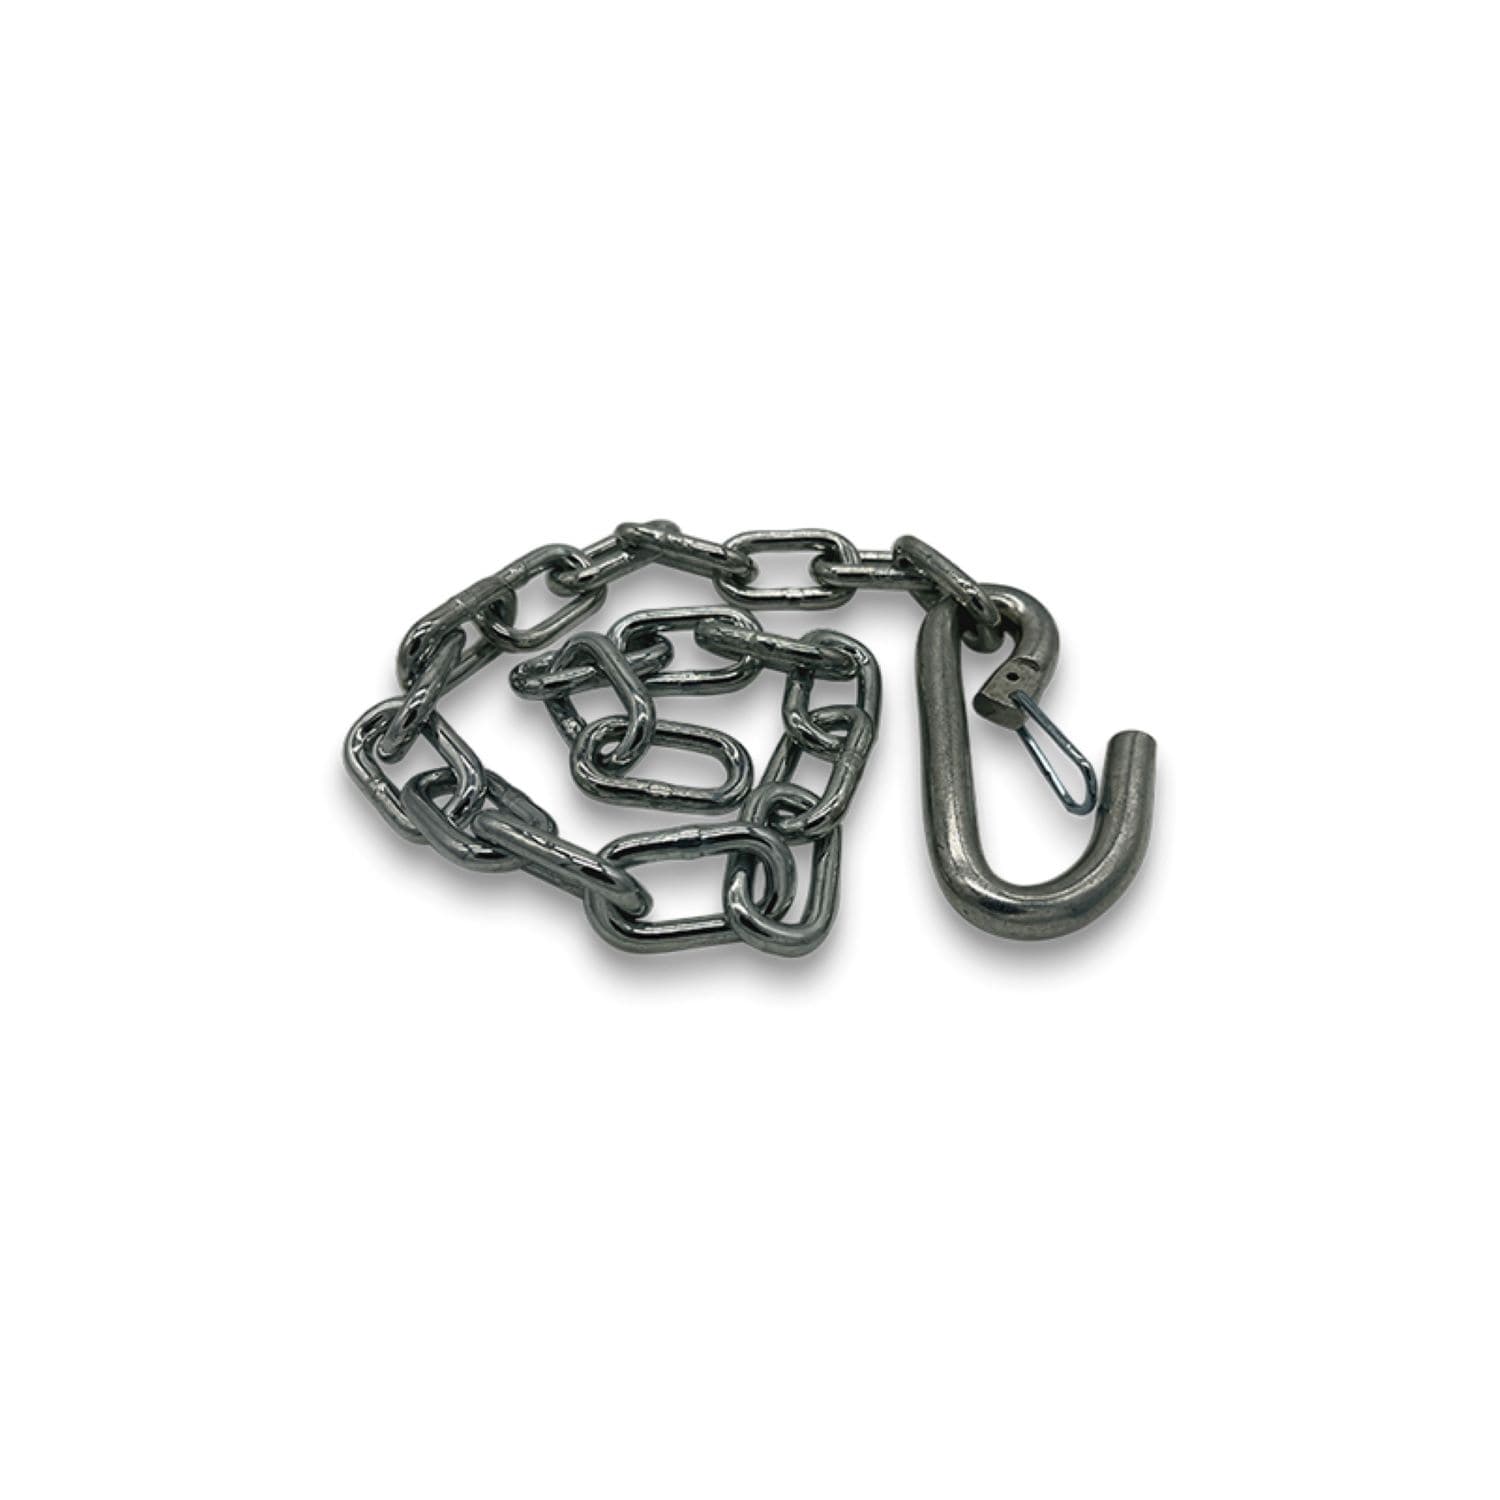 C E SMITH Class 3 Safety Chain 5000lb. Capacity 1/4 Link Size